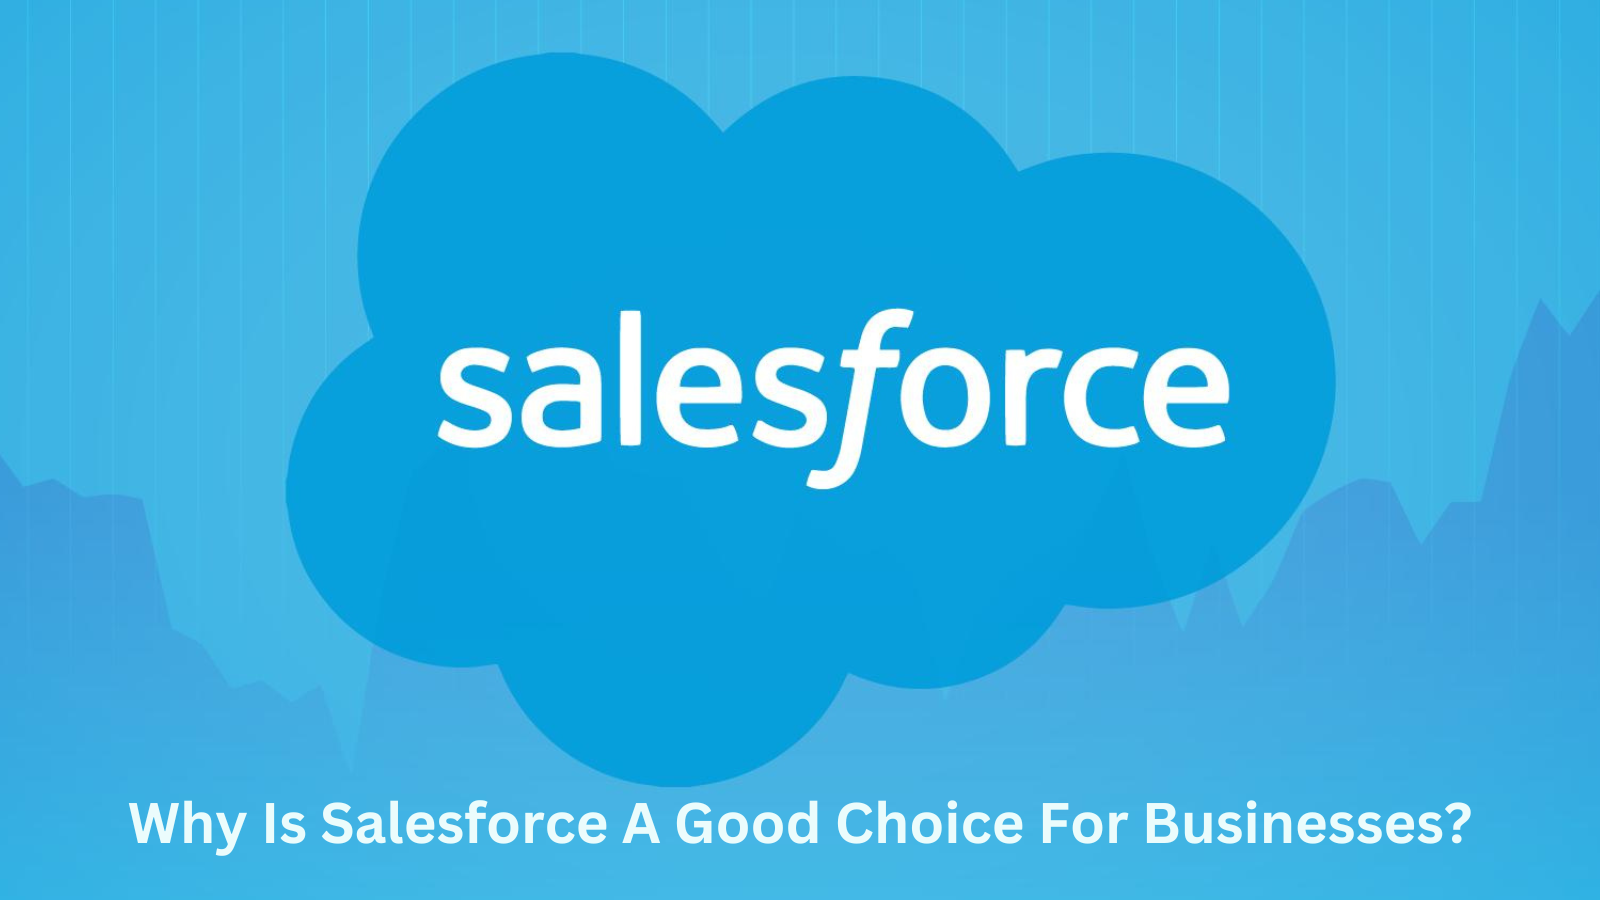 Why Is Salesforce A Good Choice For Businesses?